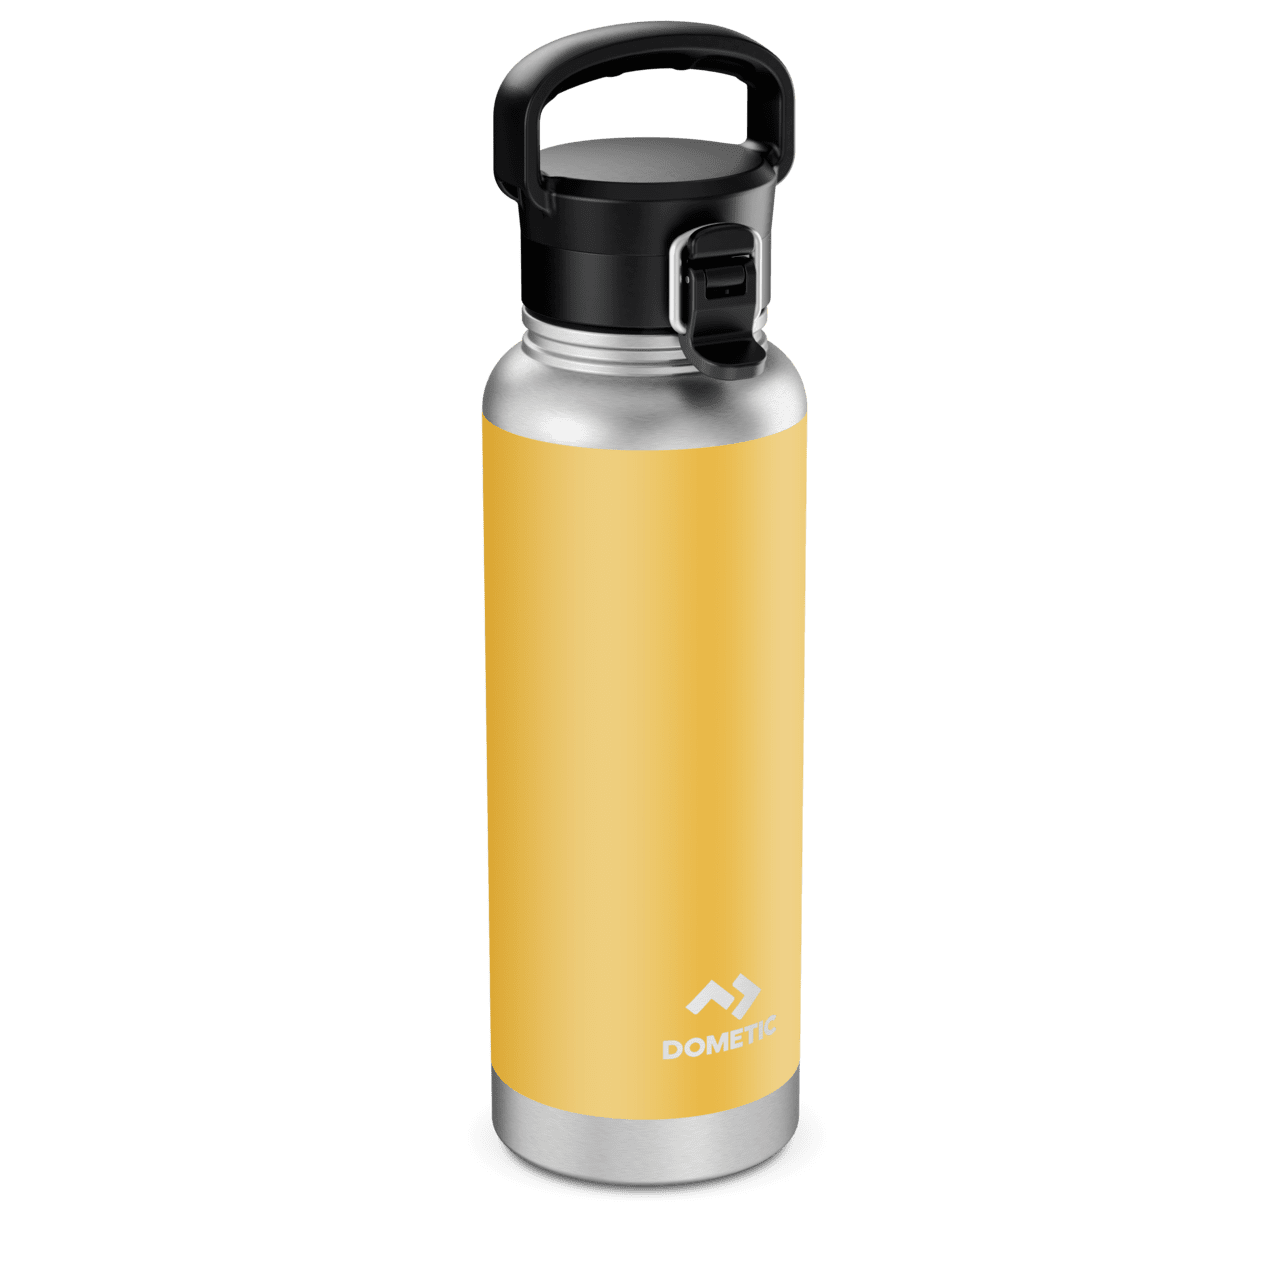 Dometic - Dometic Thermo Bottle 120 - Glow